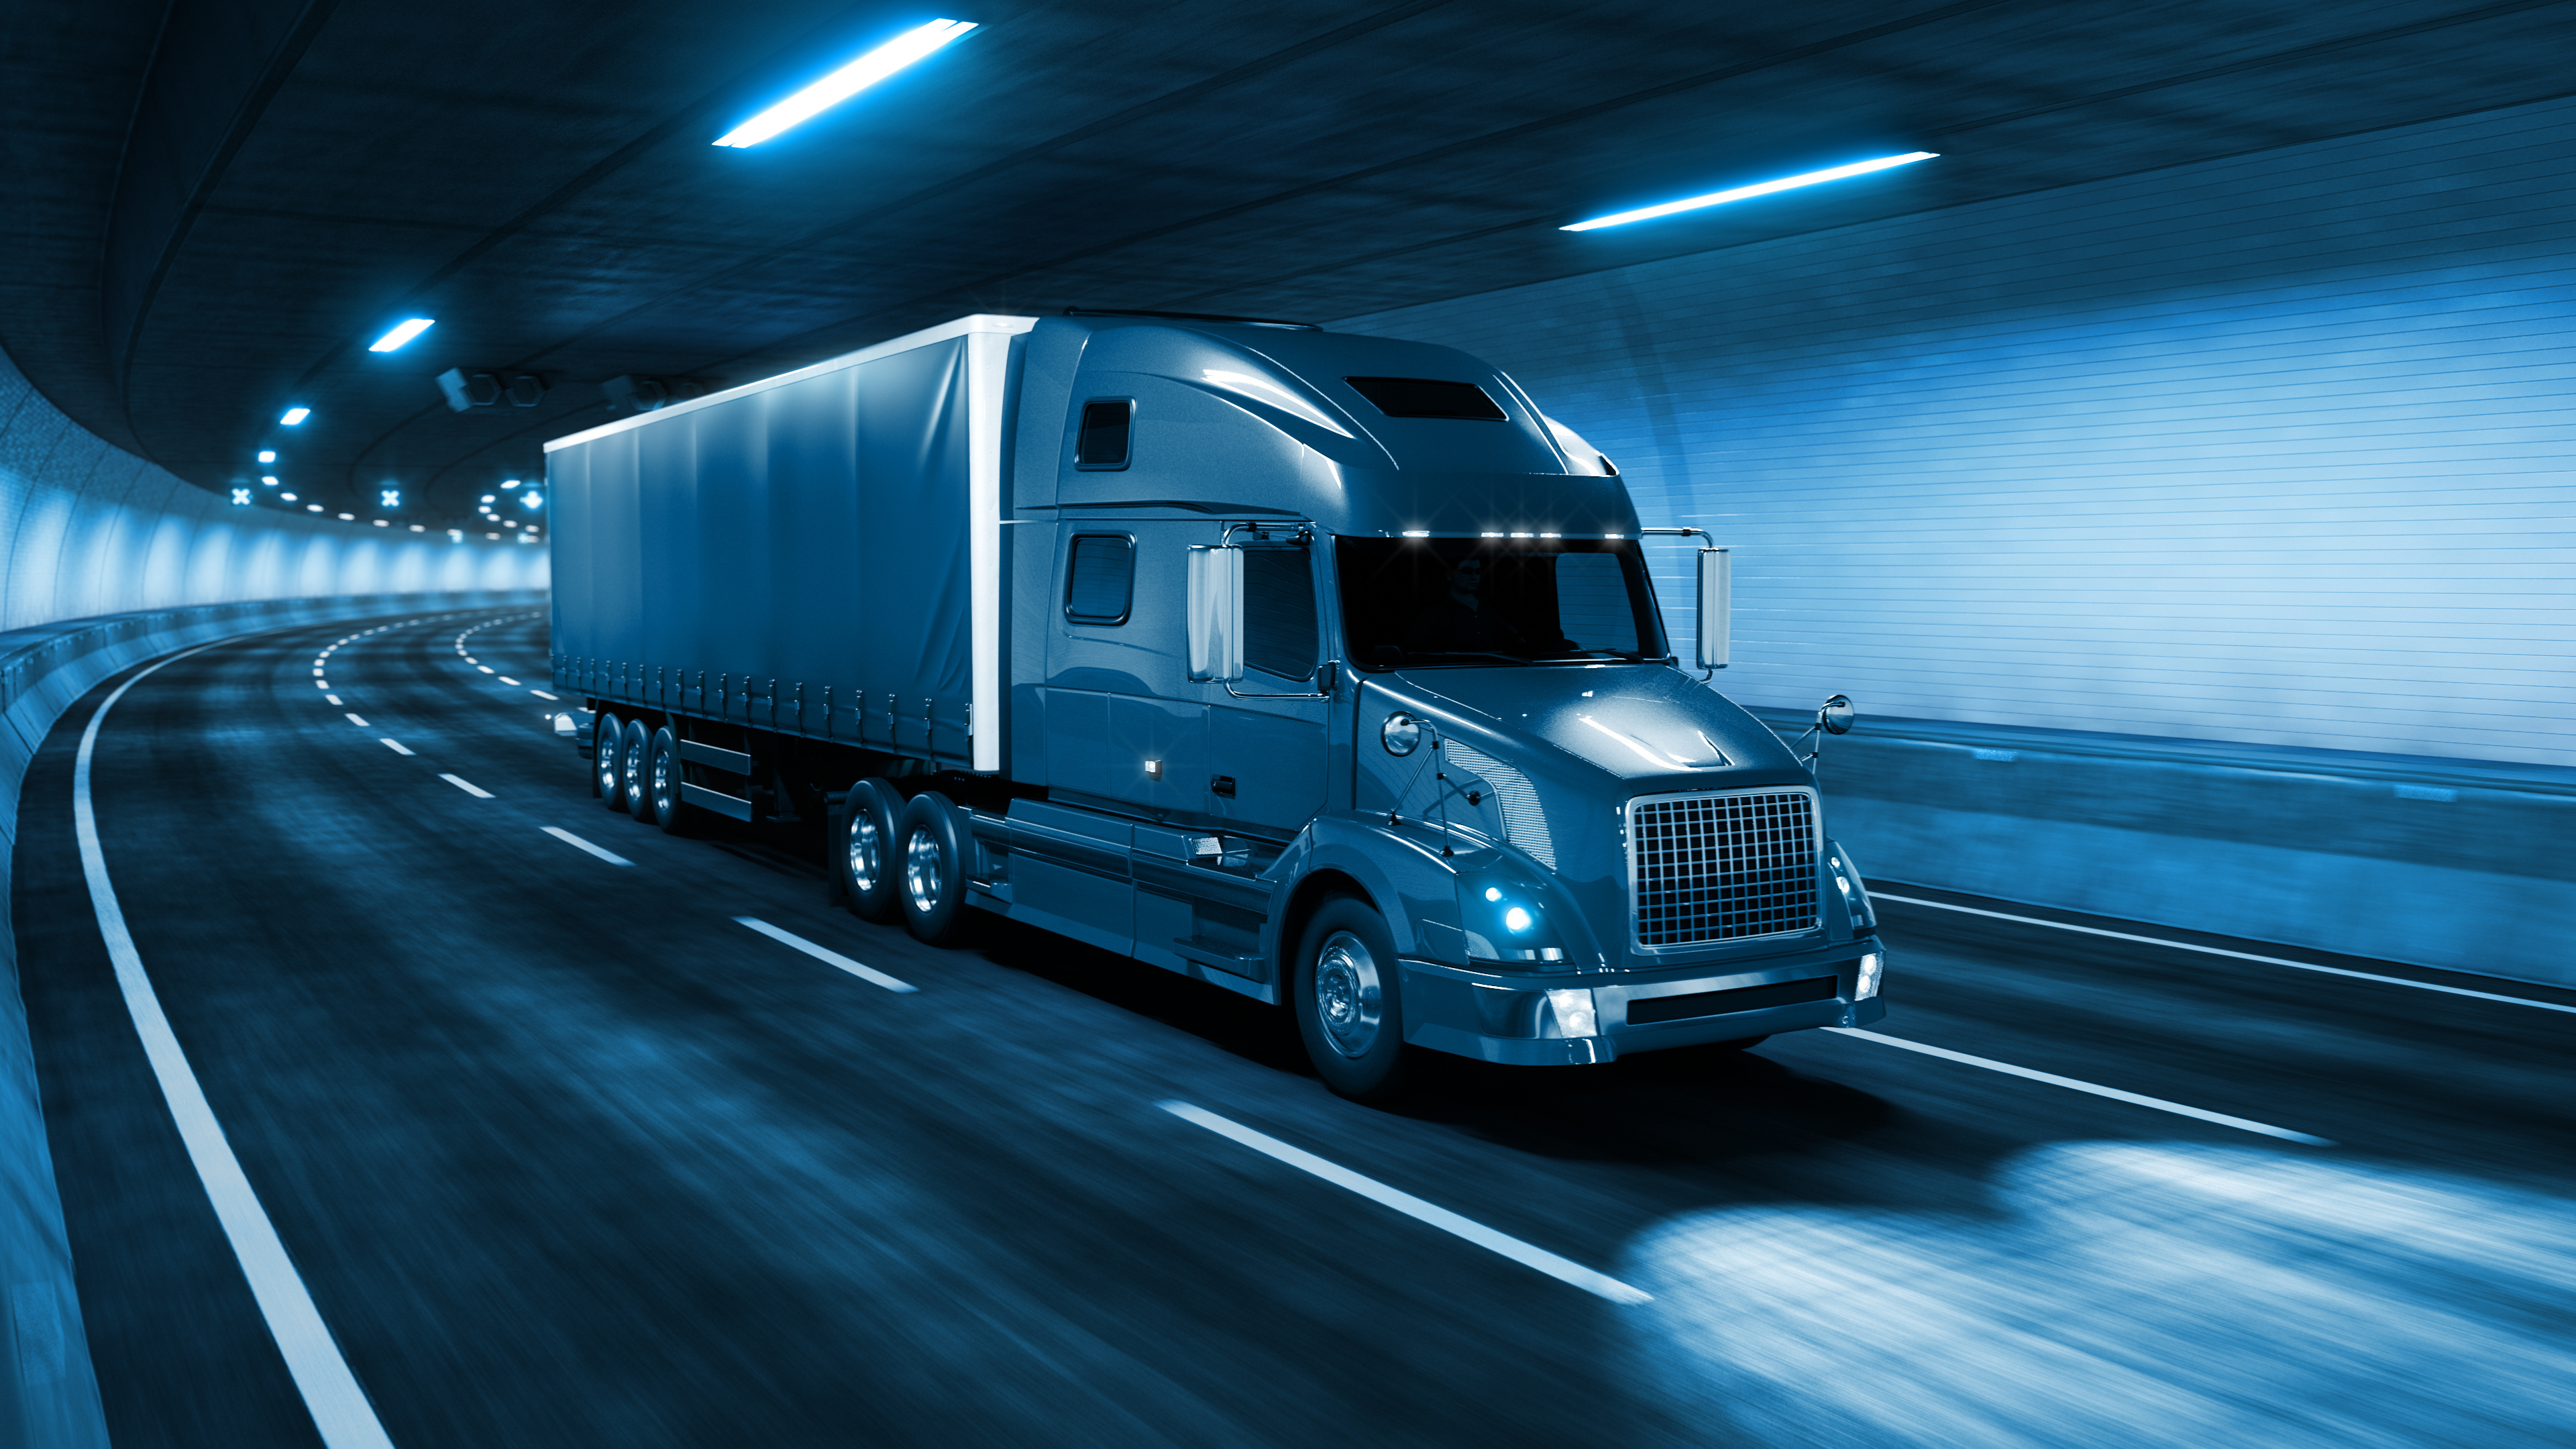 So You’re Ready to Buy a Truck Tracking System. Now What?